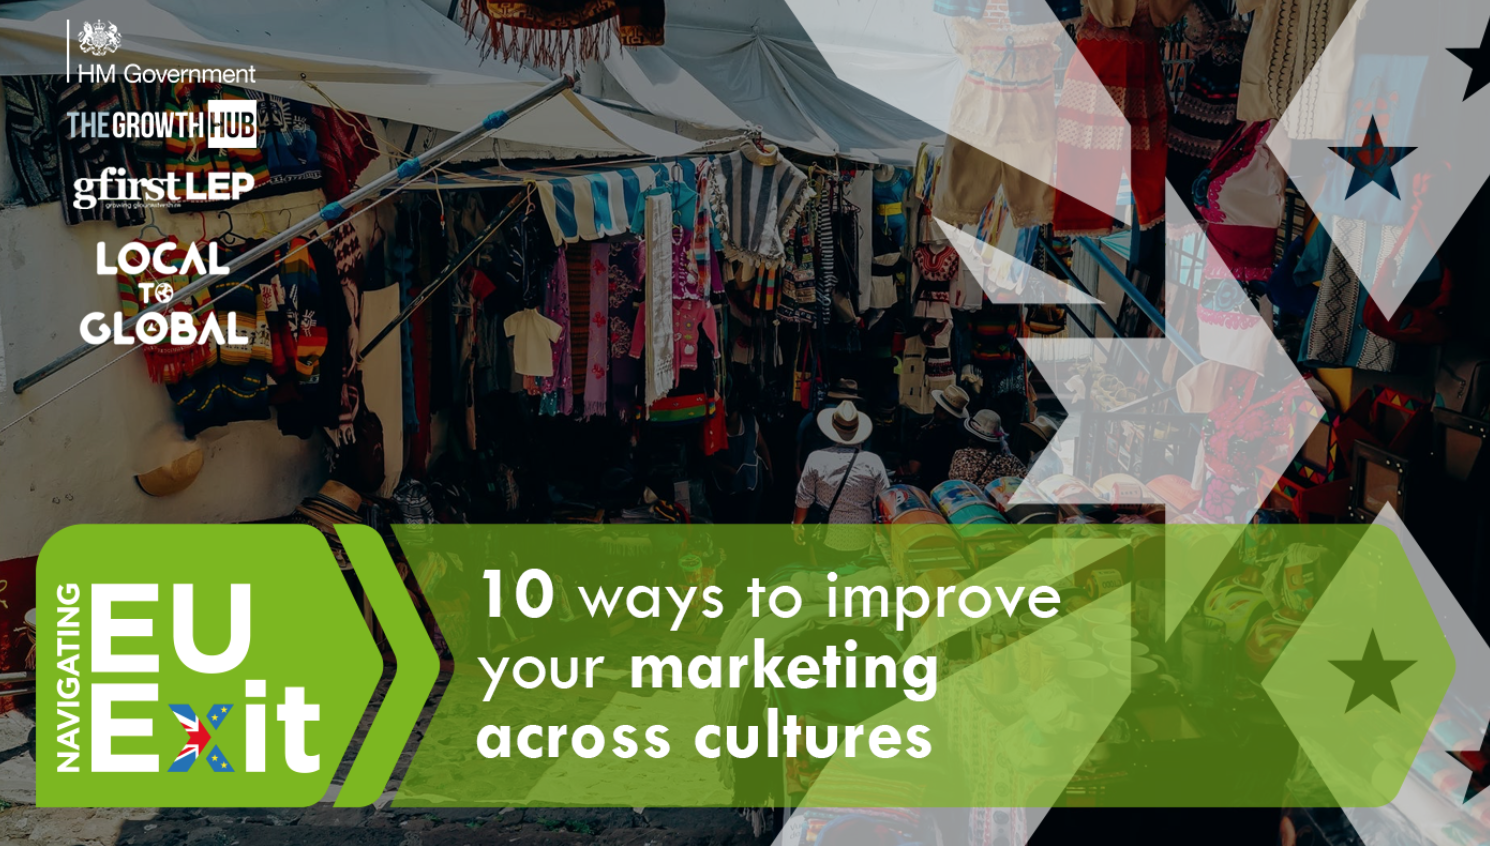 Outdoor clothes market, text '10 ways to improve your marketing across cultures'